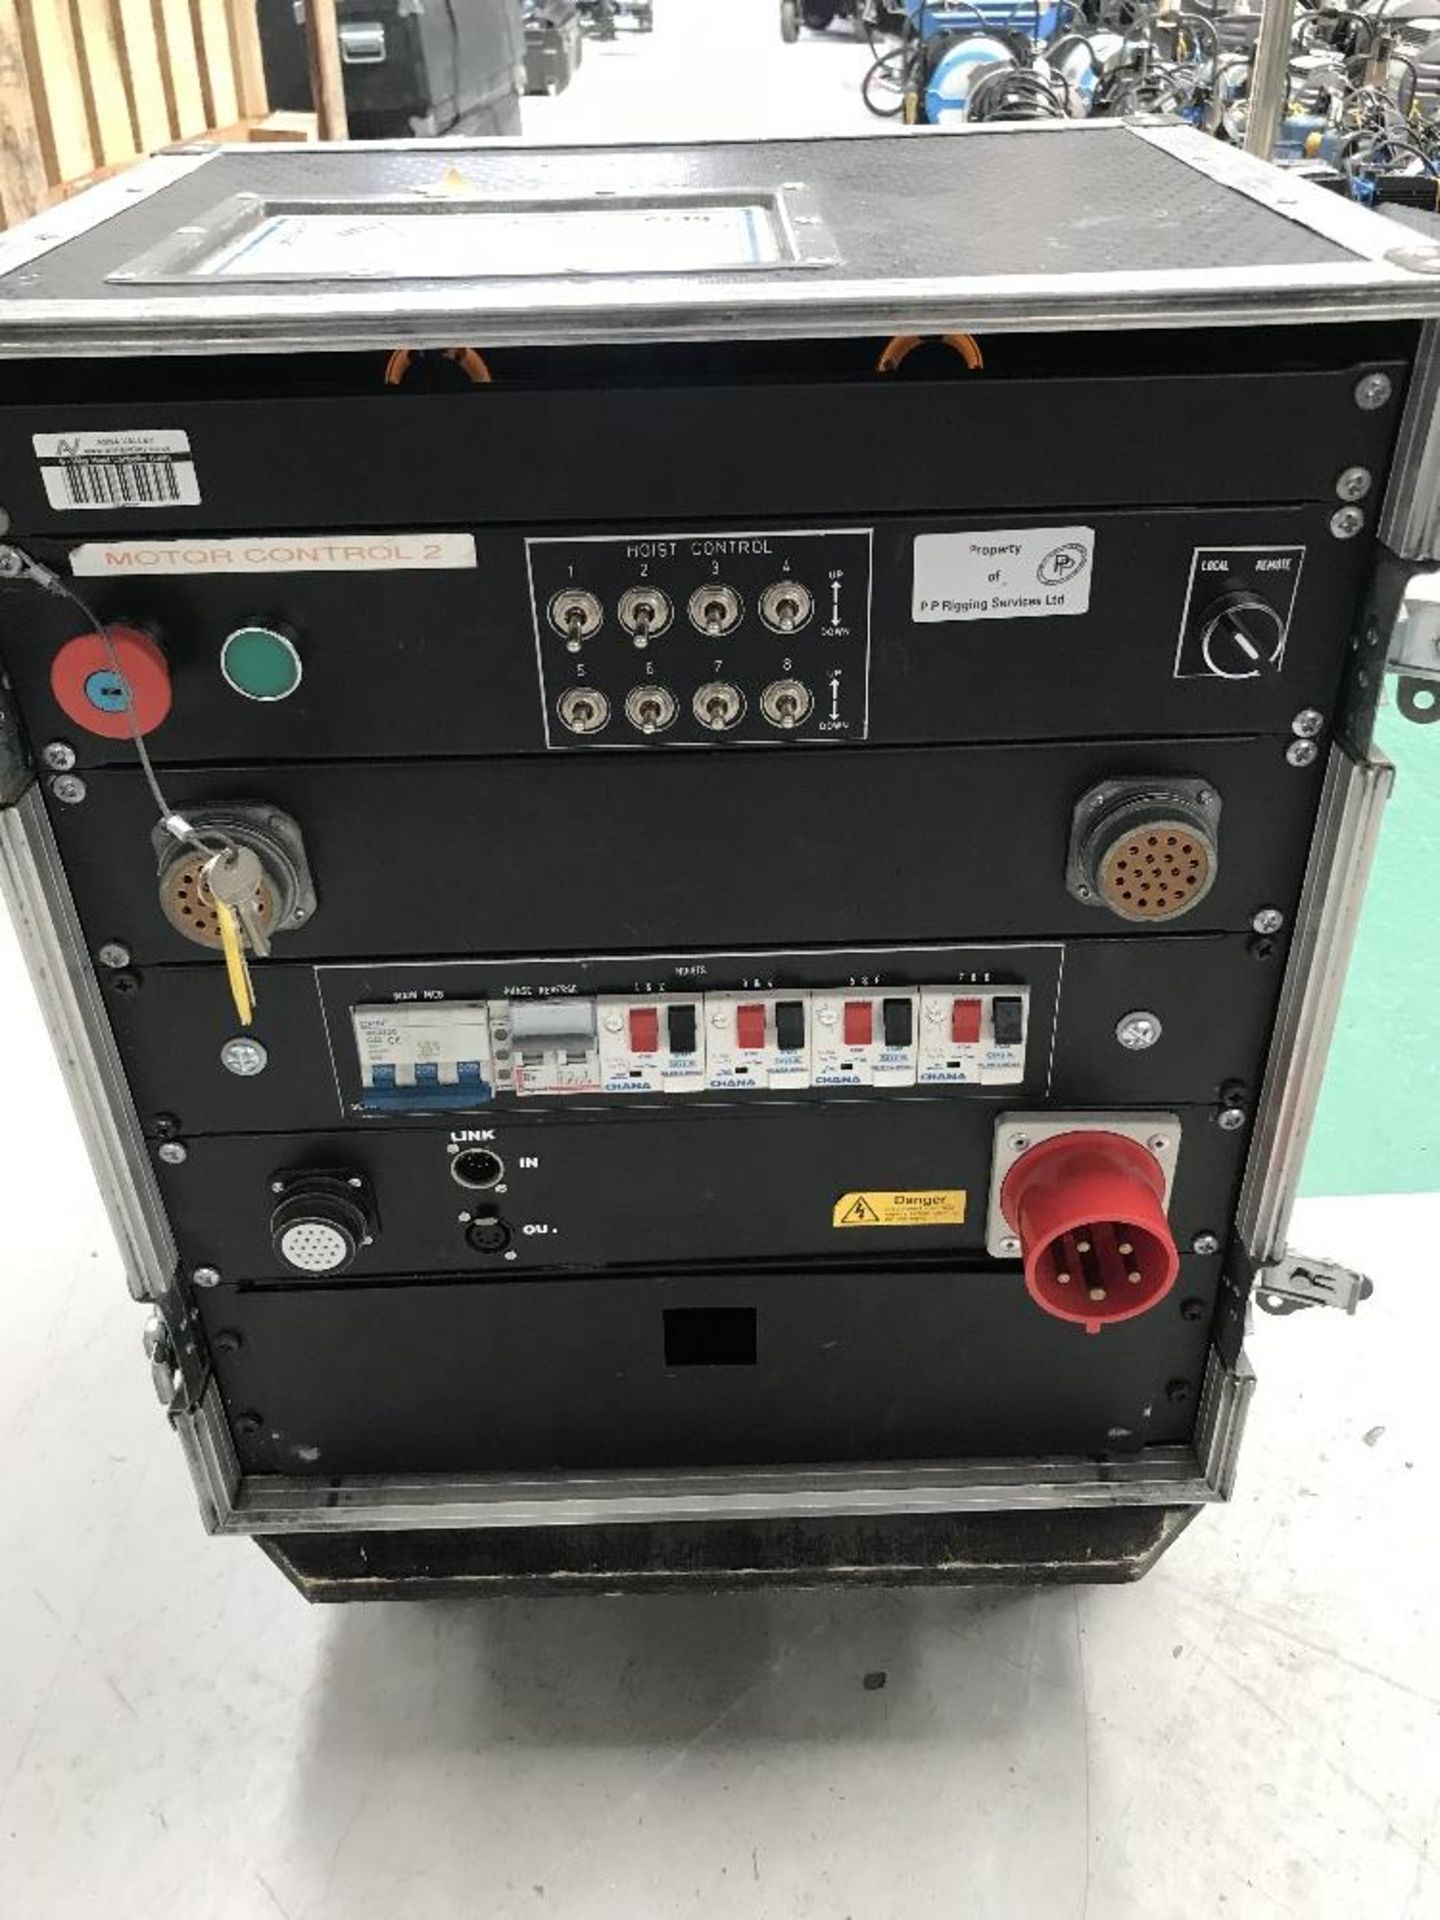 8-way Hoist Controller (Non Link) With Mobile heavy Duty Flight Case - Image 2 of 3